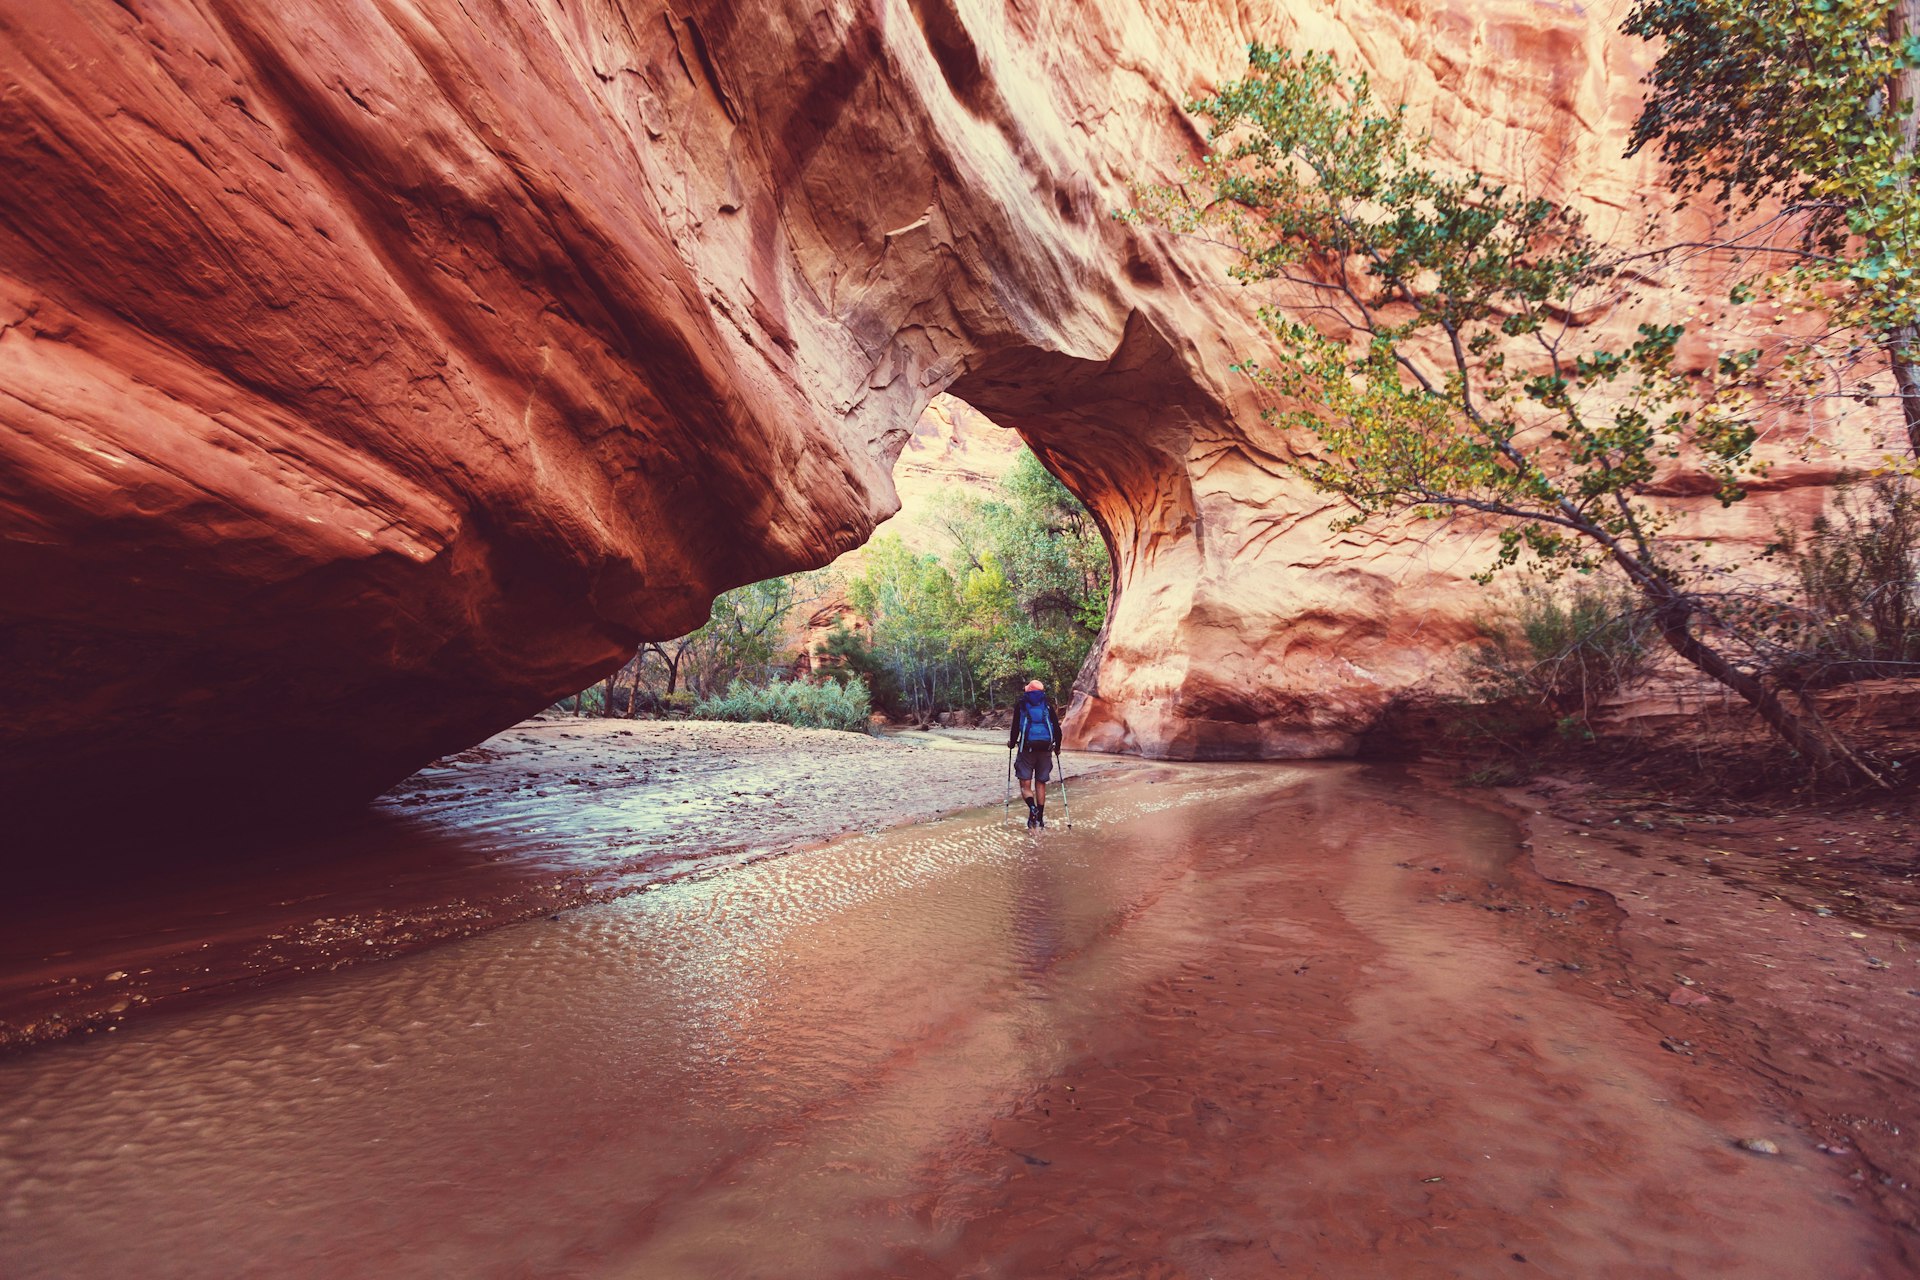 A hiker in a deep canyon with water running through it